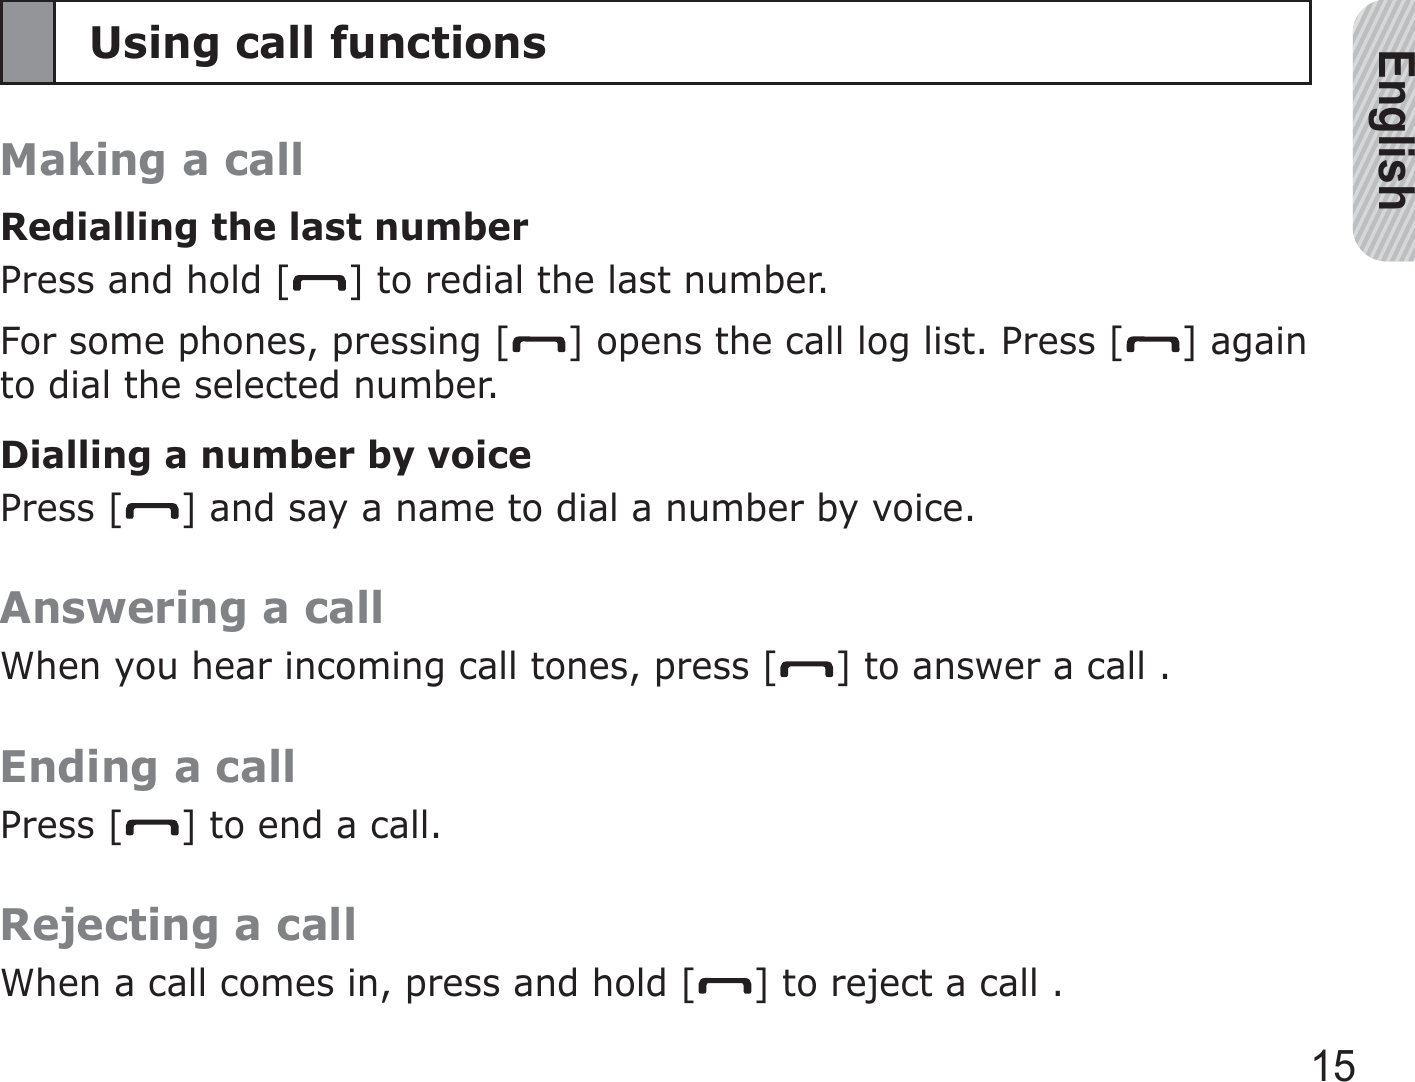 English15Using call functionsMaking a callRedialling the last numberPress and hold [ ] to redial the last number.For some phones, pressing [ ] opens the call log list. Press [ ] again to dial the selected number.Dialling a number by voicePress [ ] and say a name to dial a number by voice.Answering a callWhen you hear incoming call tones, press [ ] to answer a call .Ending a callPress [ ] to end a call.Rejecting a callWhen a call comes in, press and hold [ ] to reject a call .